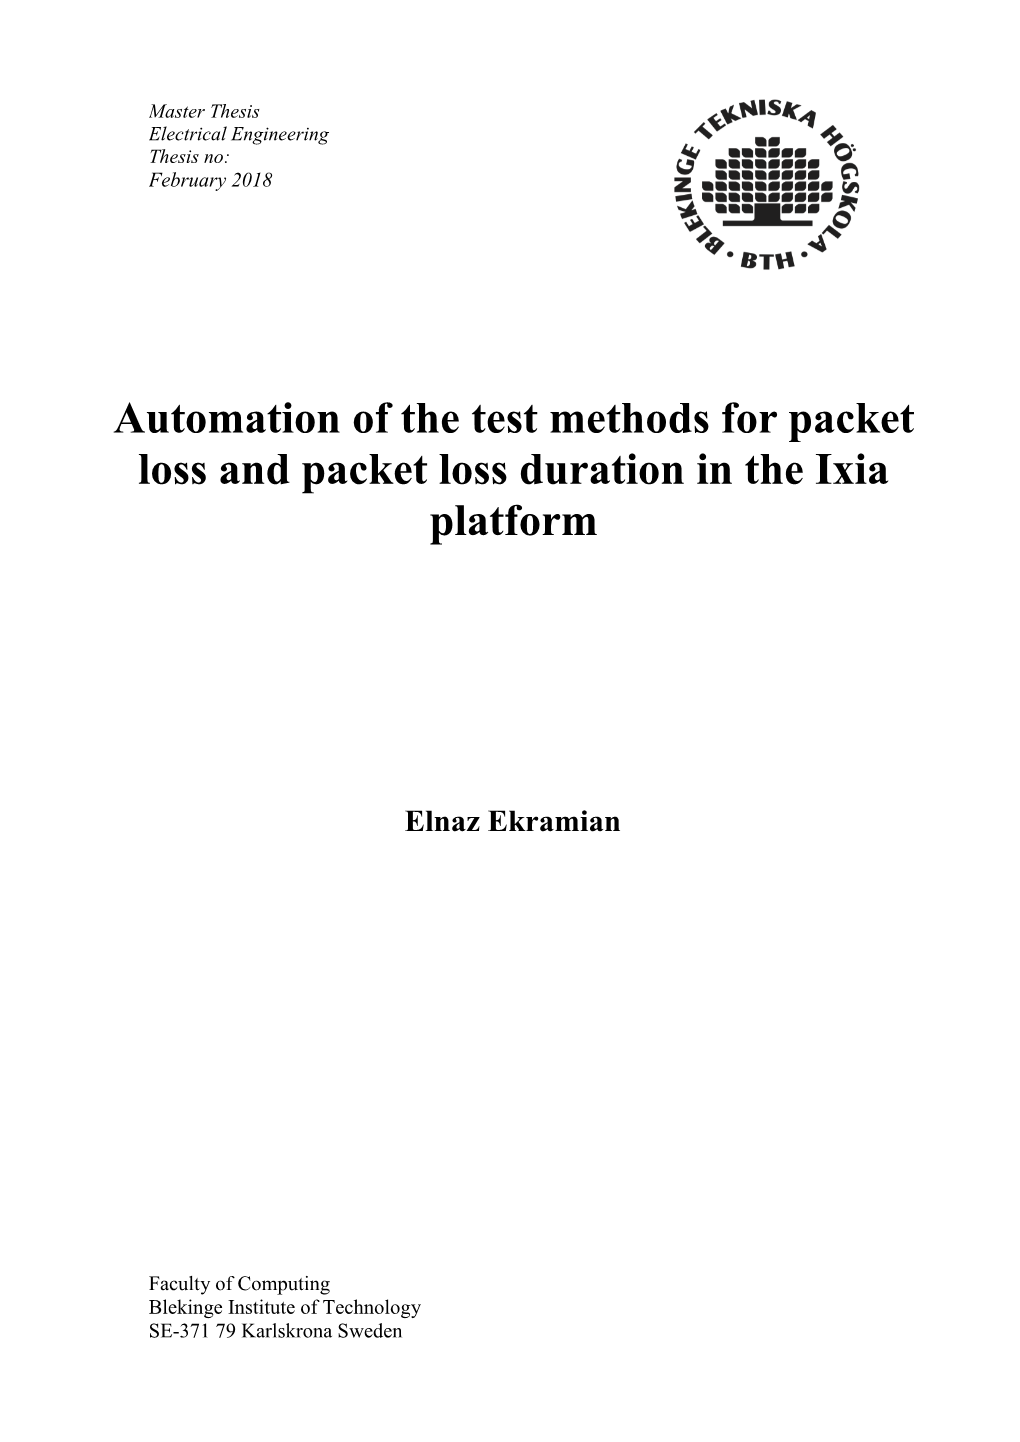 Automation of the Test Methods for Packet Loss and Packet Loss Duration in the Ixia Platform